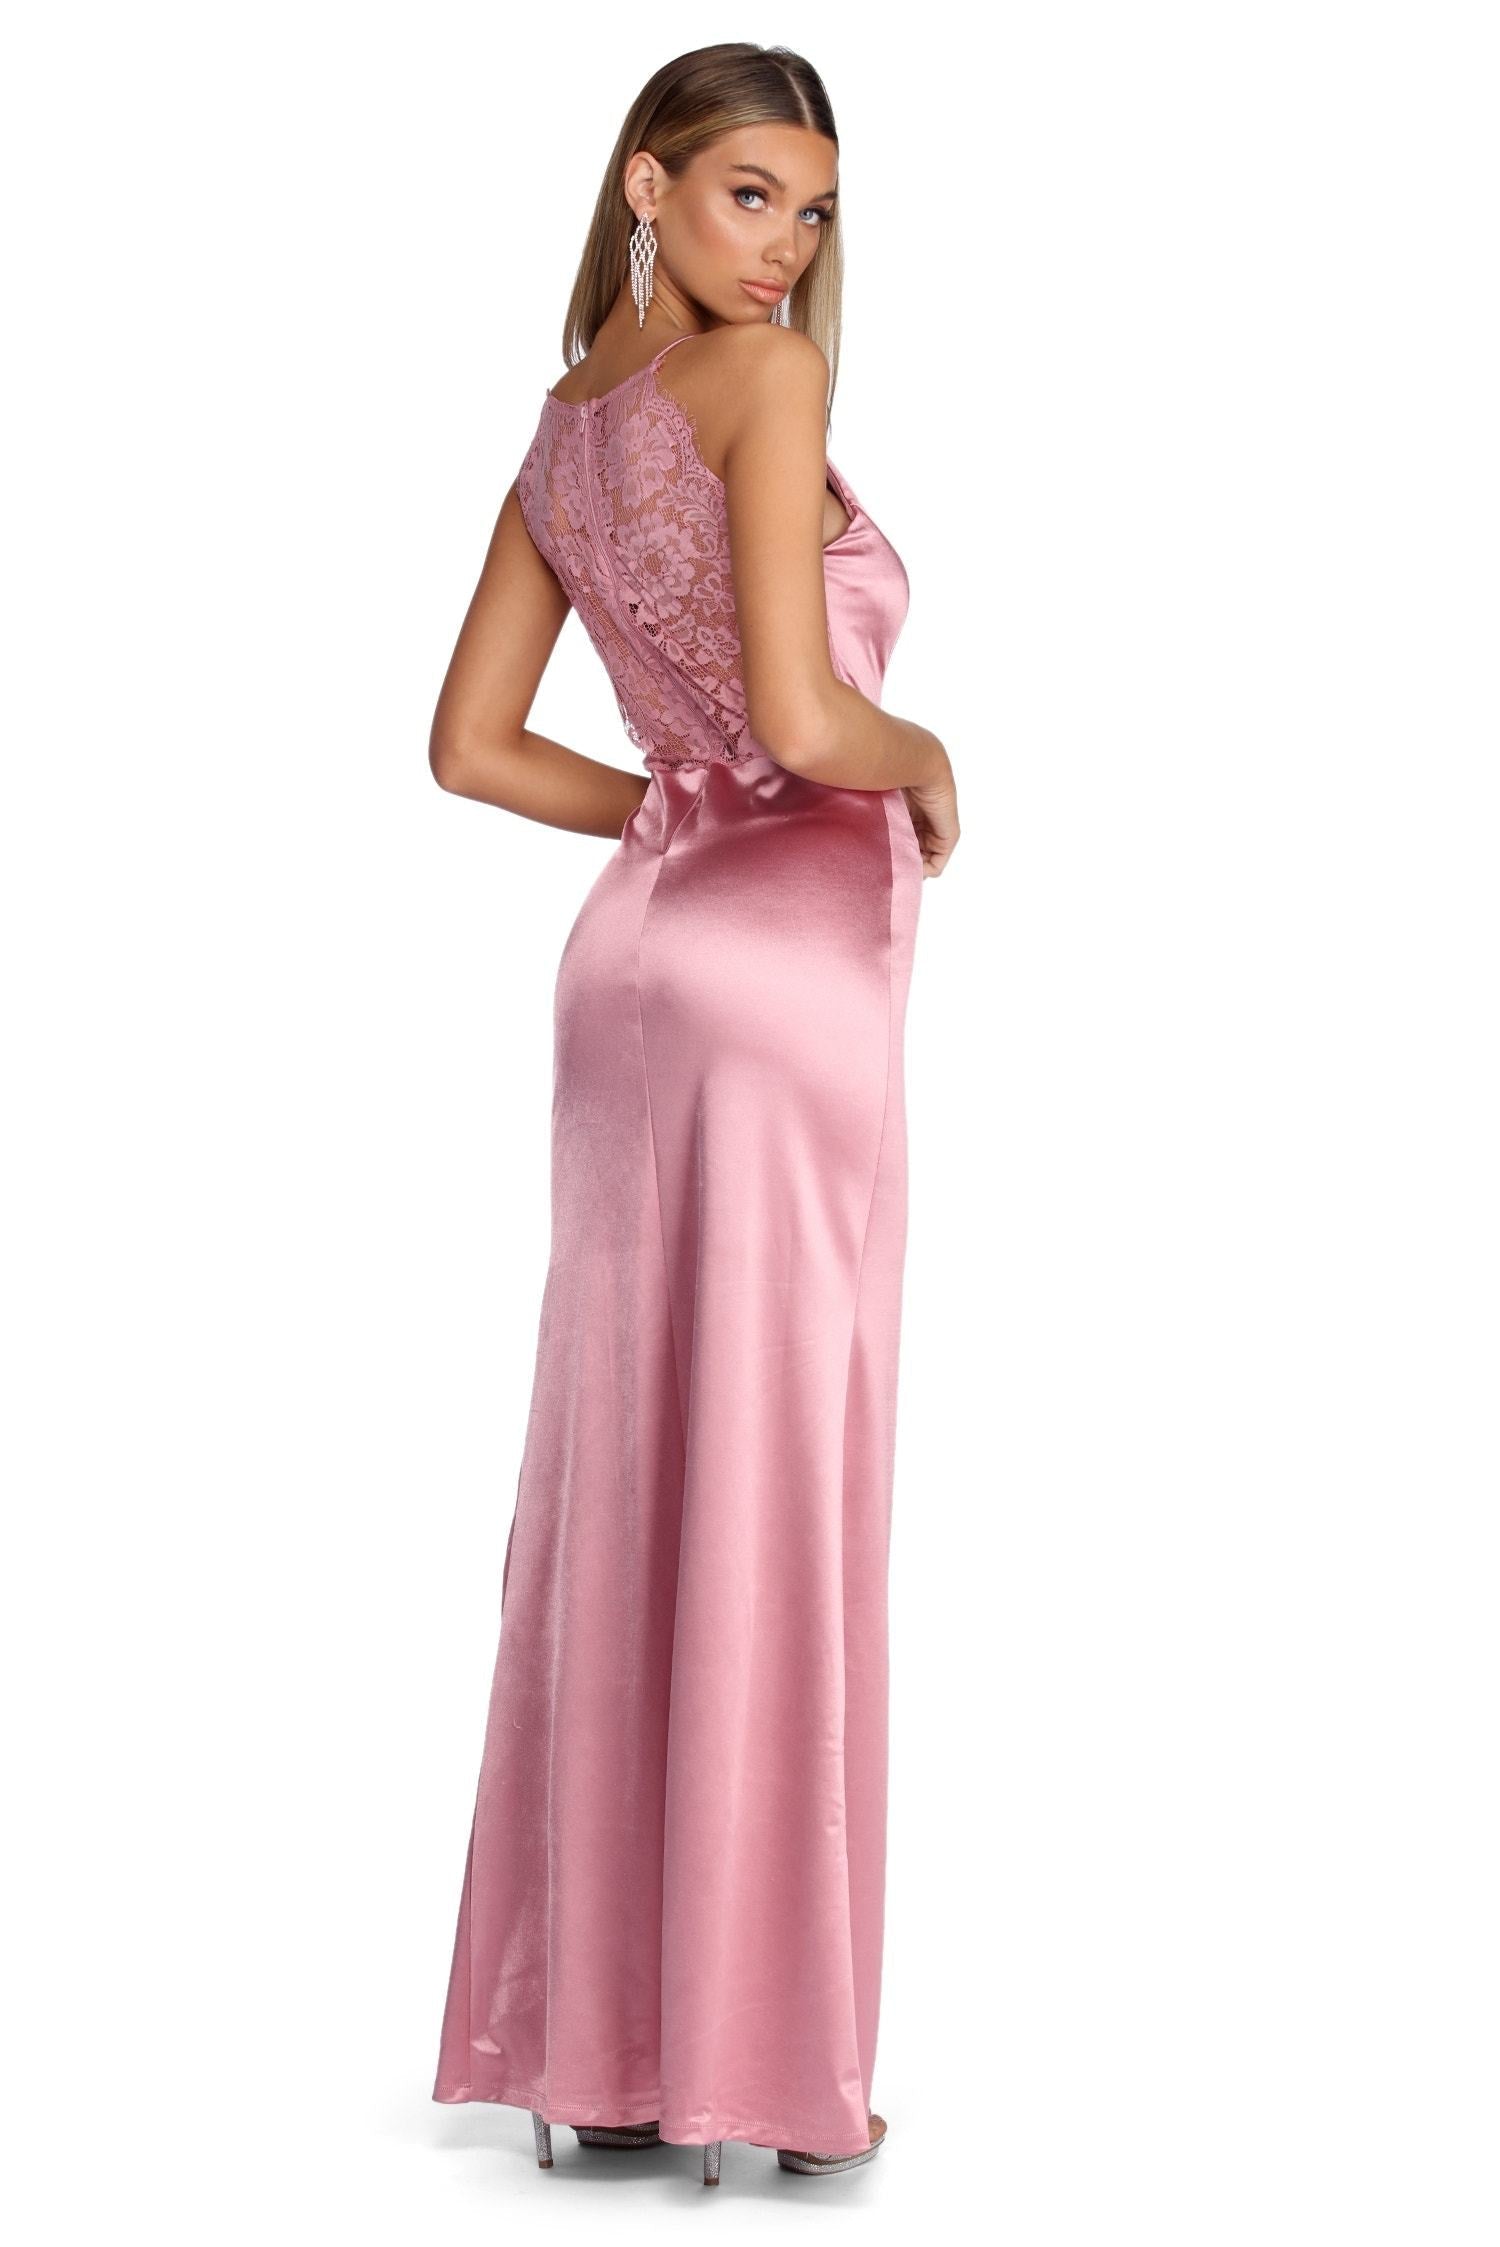 Katrina Formal Lace And Satin Dress - Lady Occasions